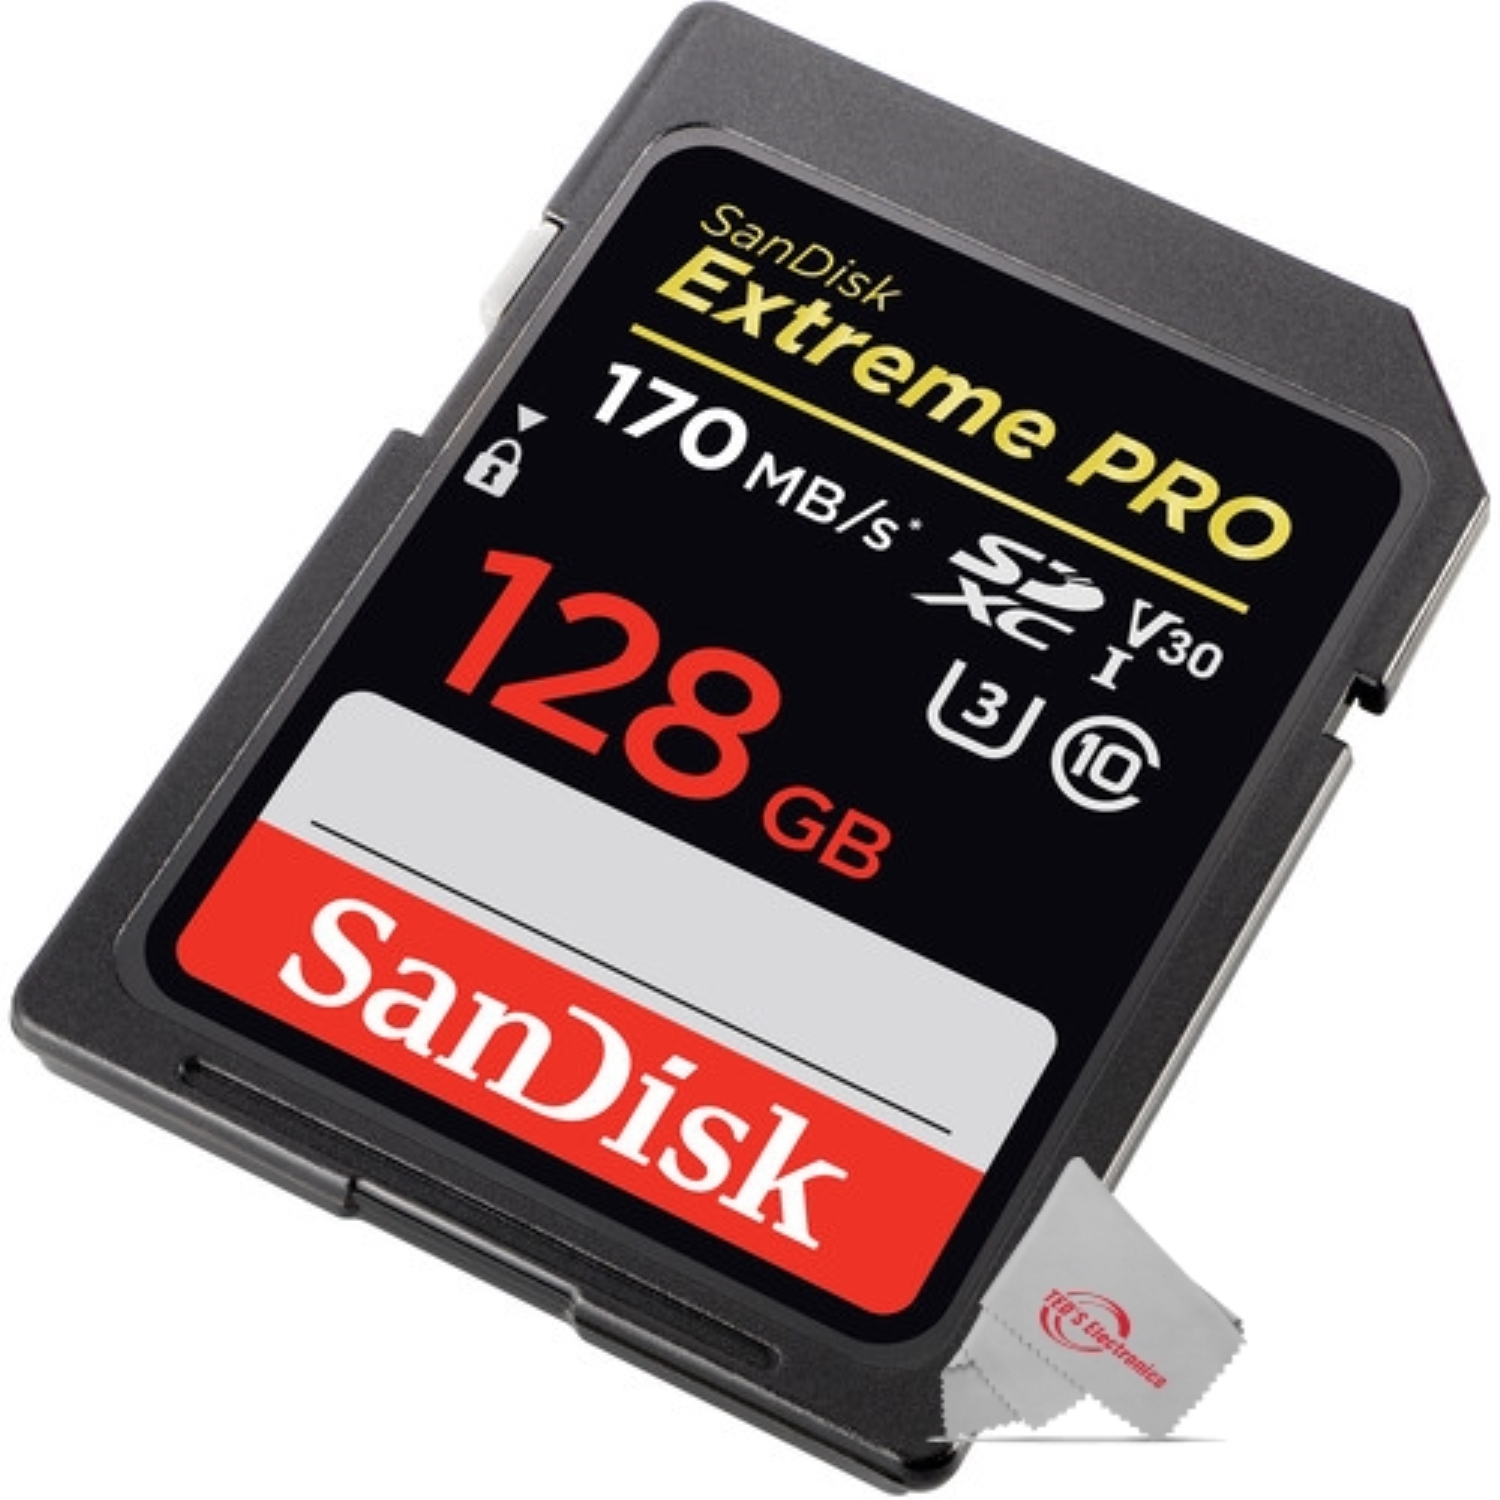 2x SanDisk Extreme Pro 128GB SDXC UHS-I/U3 V30 Class 10 Memory Card, Speed Up to 170MB/s (SDSDXXY-128G-GN4IN) - image 3 of 3